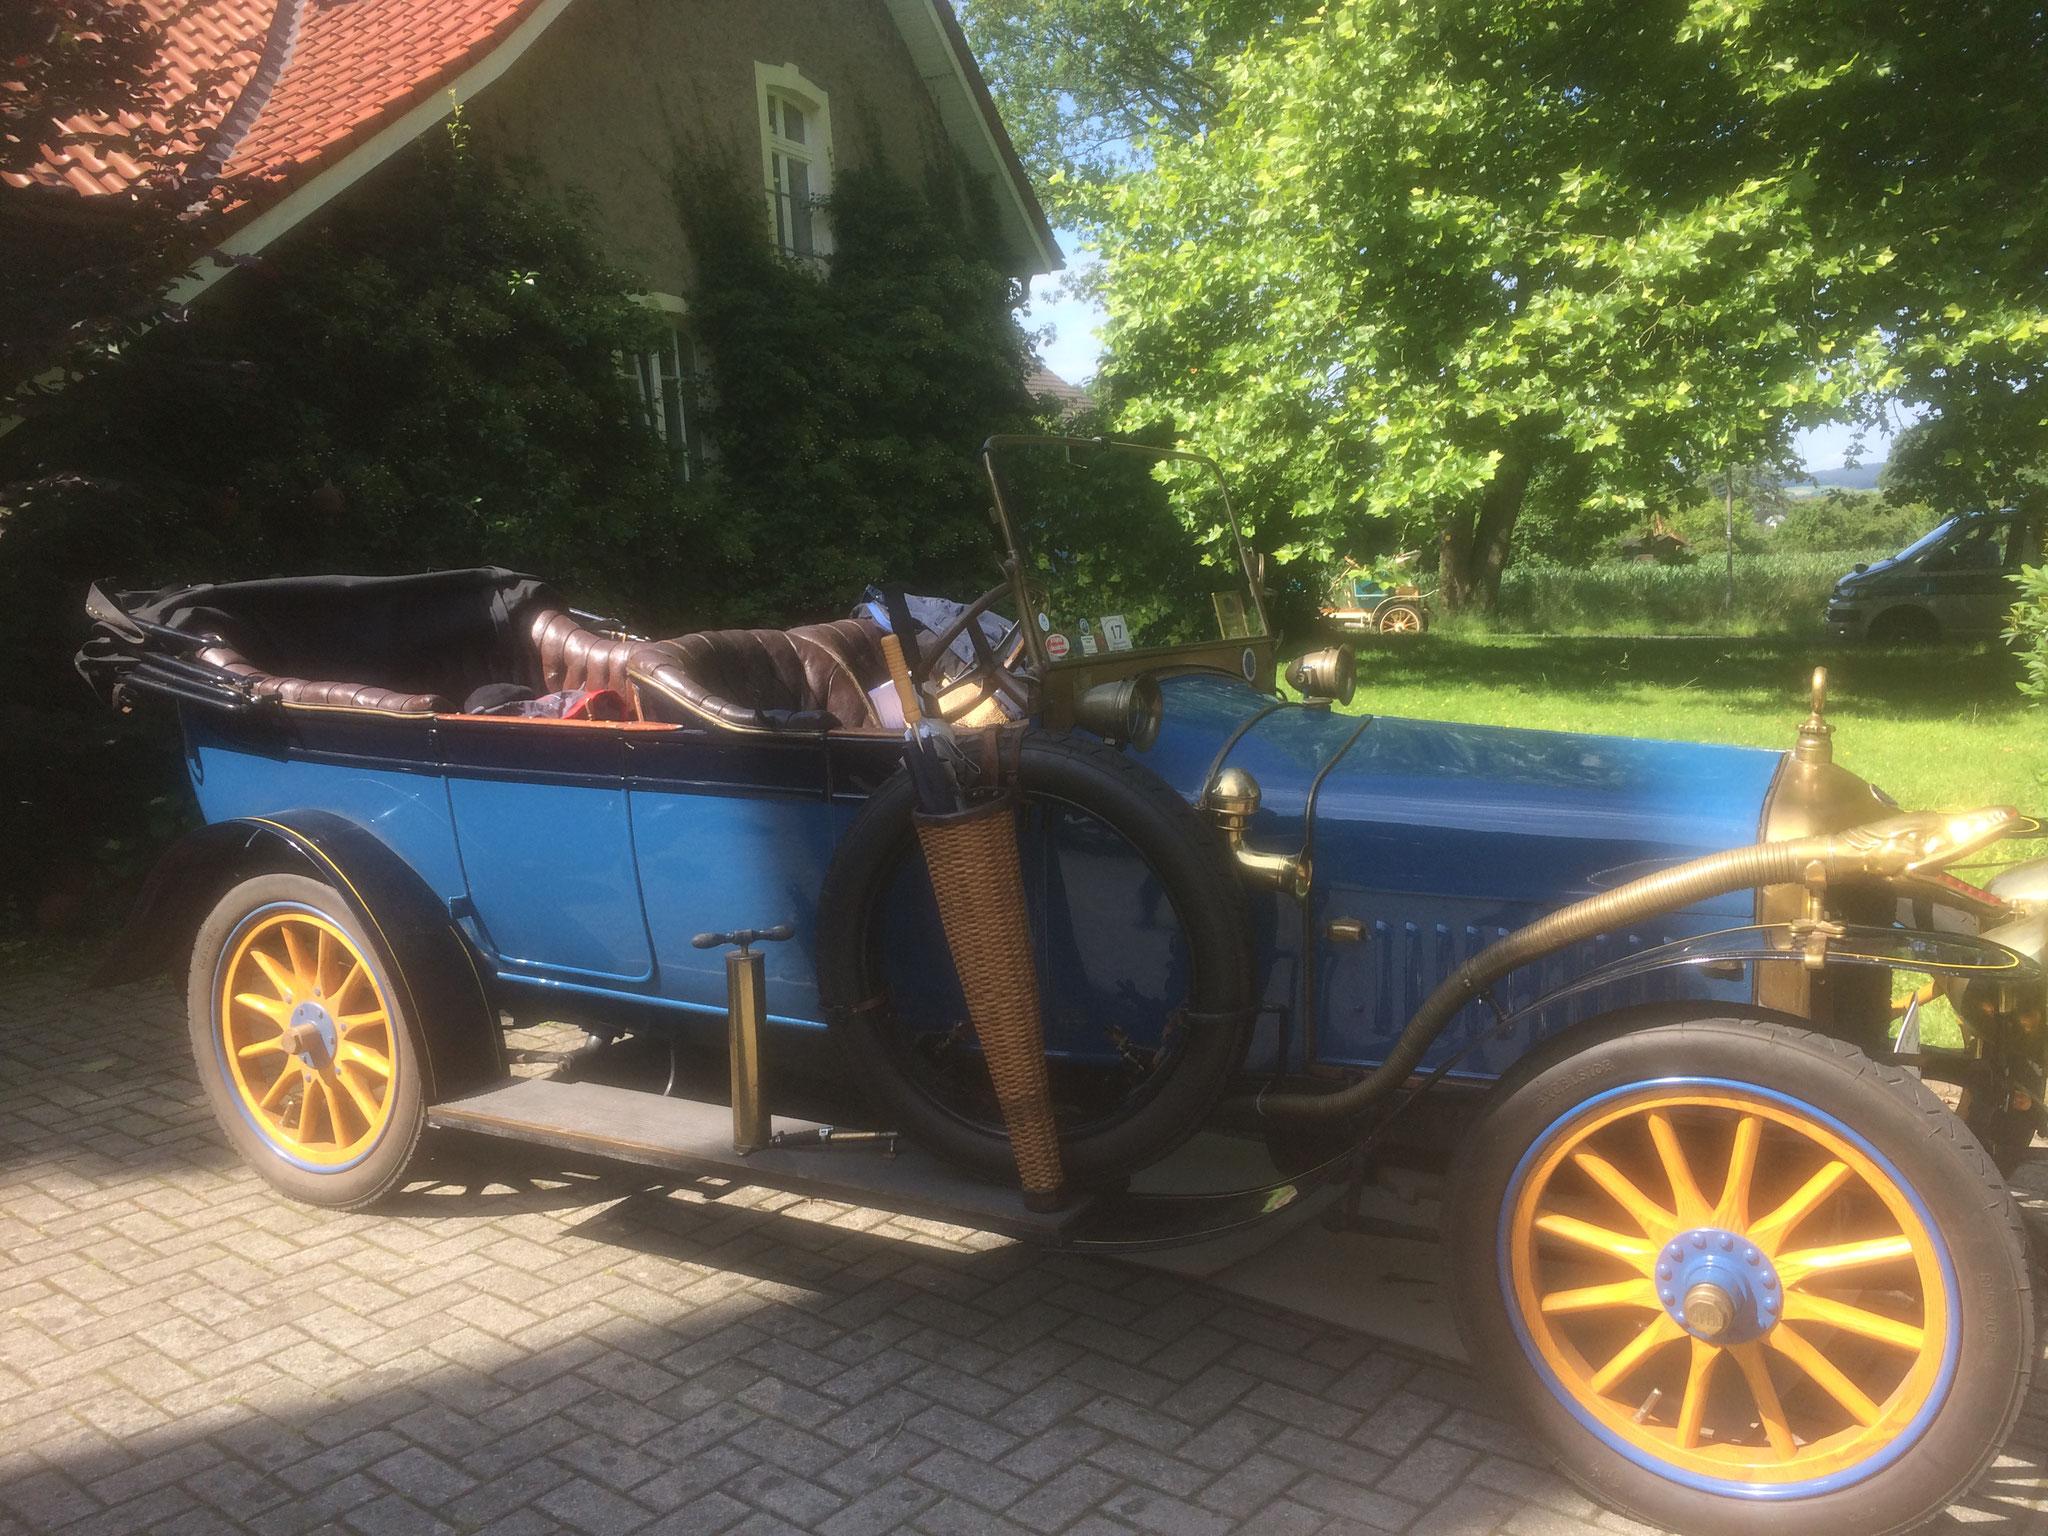 Delage Typ B 1, constructed in 1915, 3200 ccm, 4 cylinders - Germany